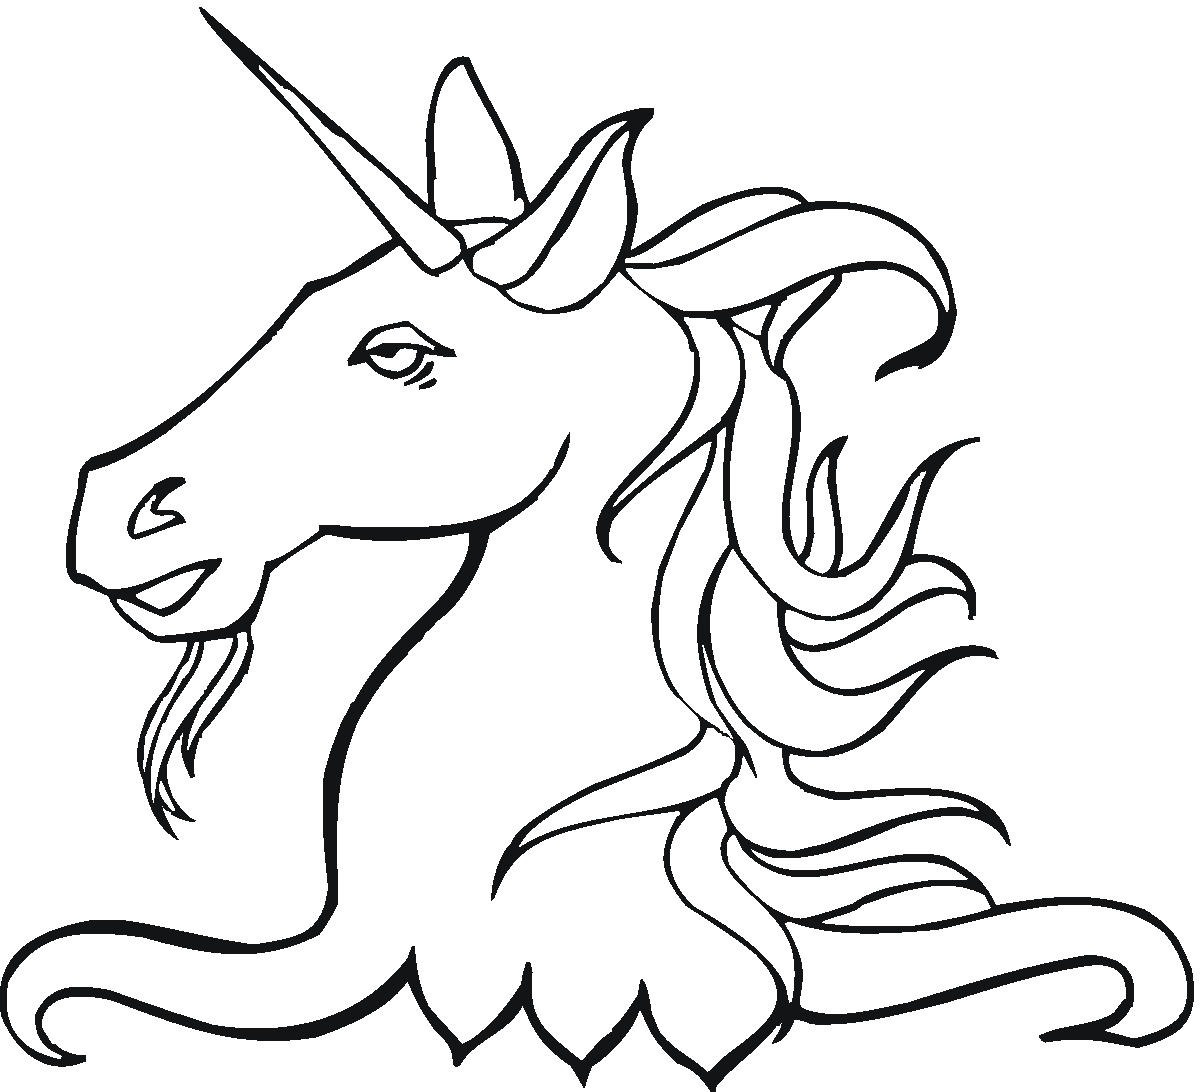 Head unicorn coloring pages for kids